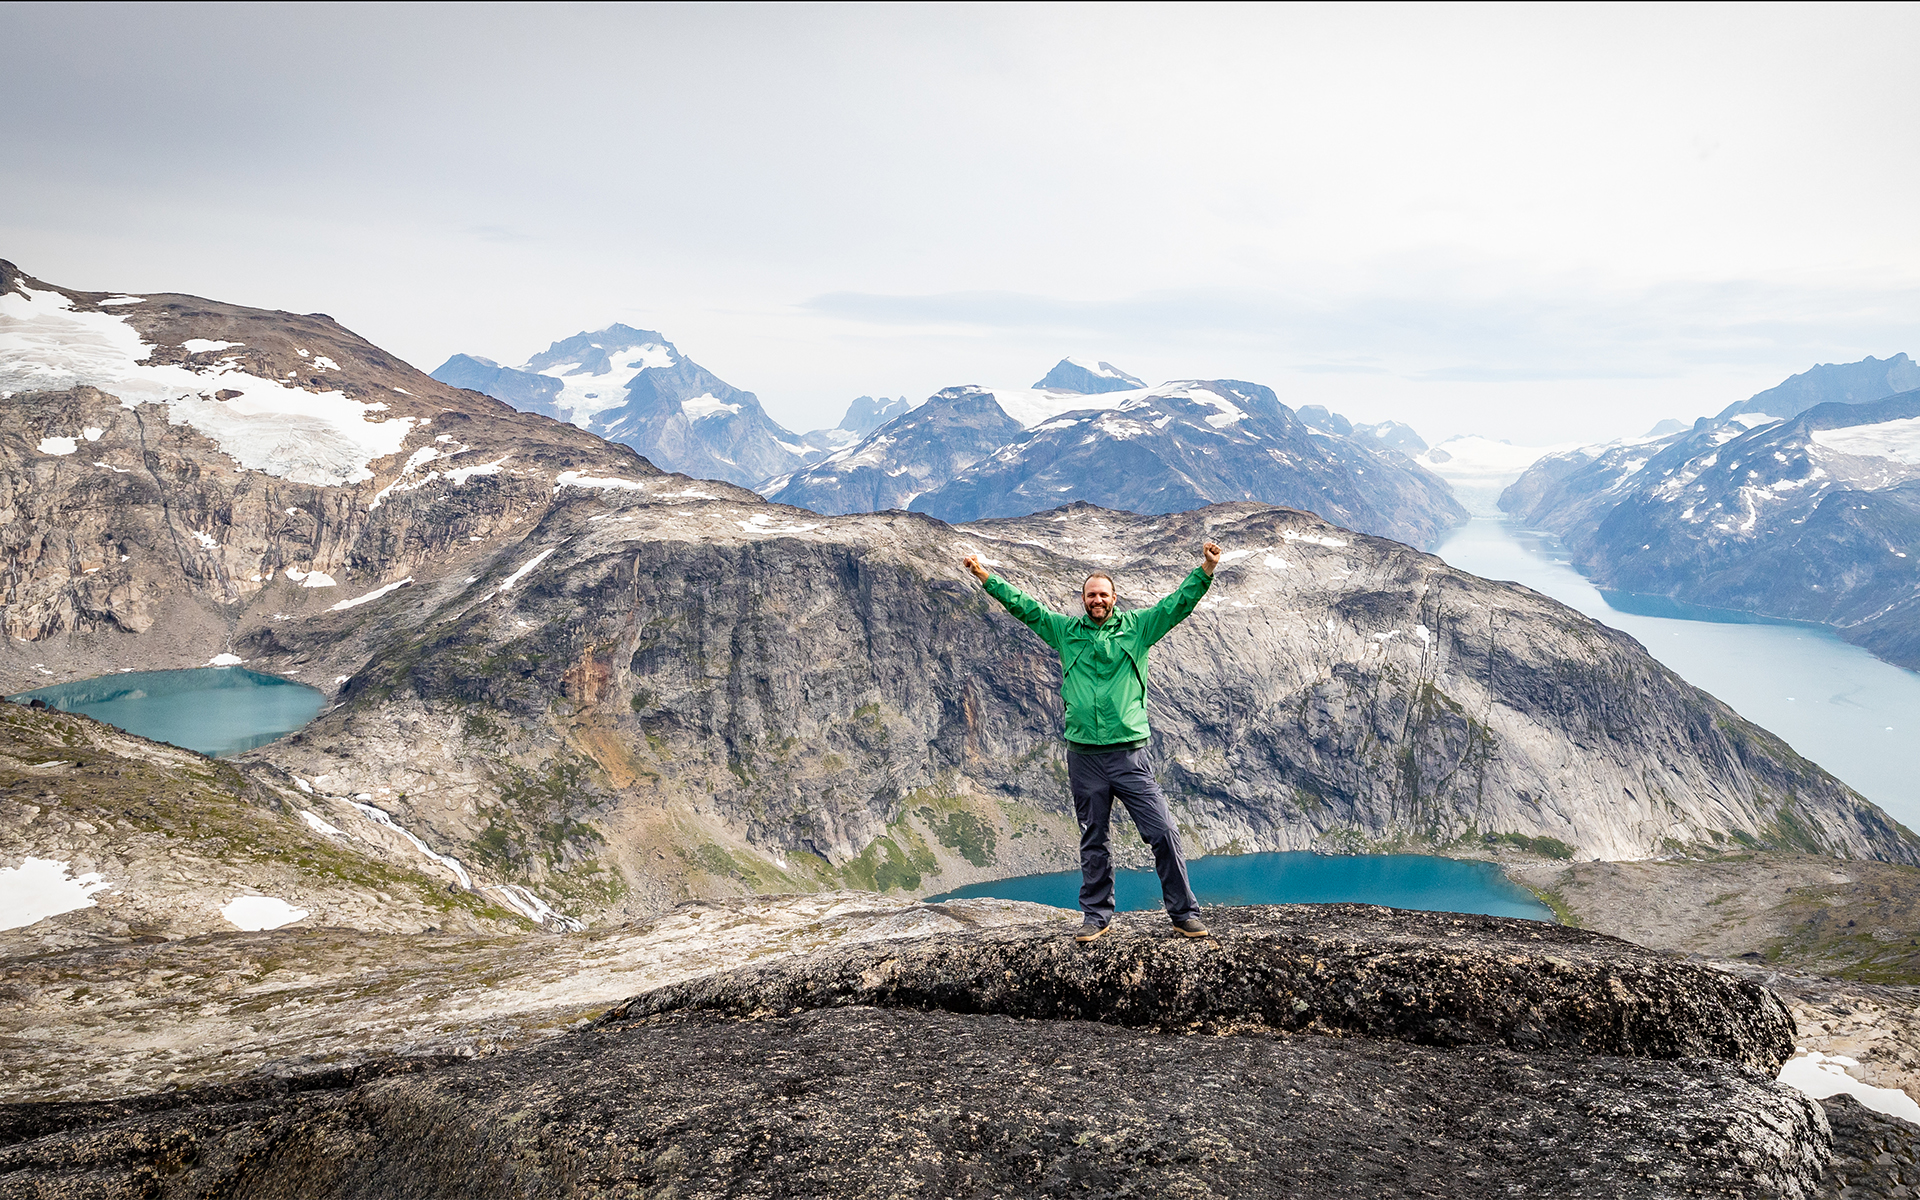 Male traveler in green parka celebrates with arms out standing atop giant mountain range with blue lakes and fjords below